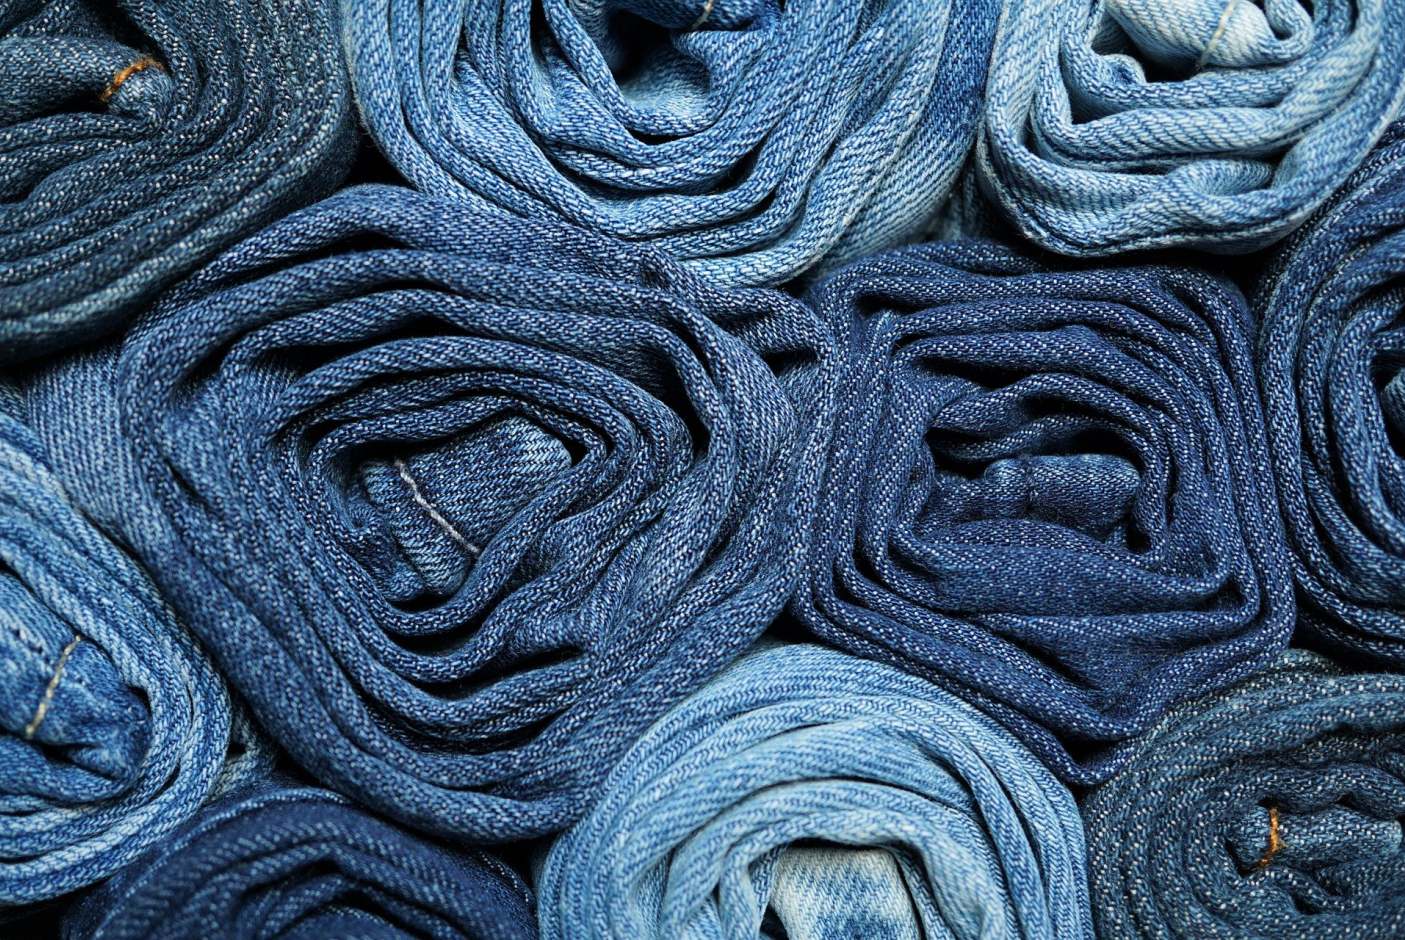 Denim Fabric Weaving - Manufacturing Process, Methods, and technologies -  Page 4 of 4 - Textile School